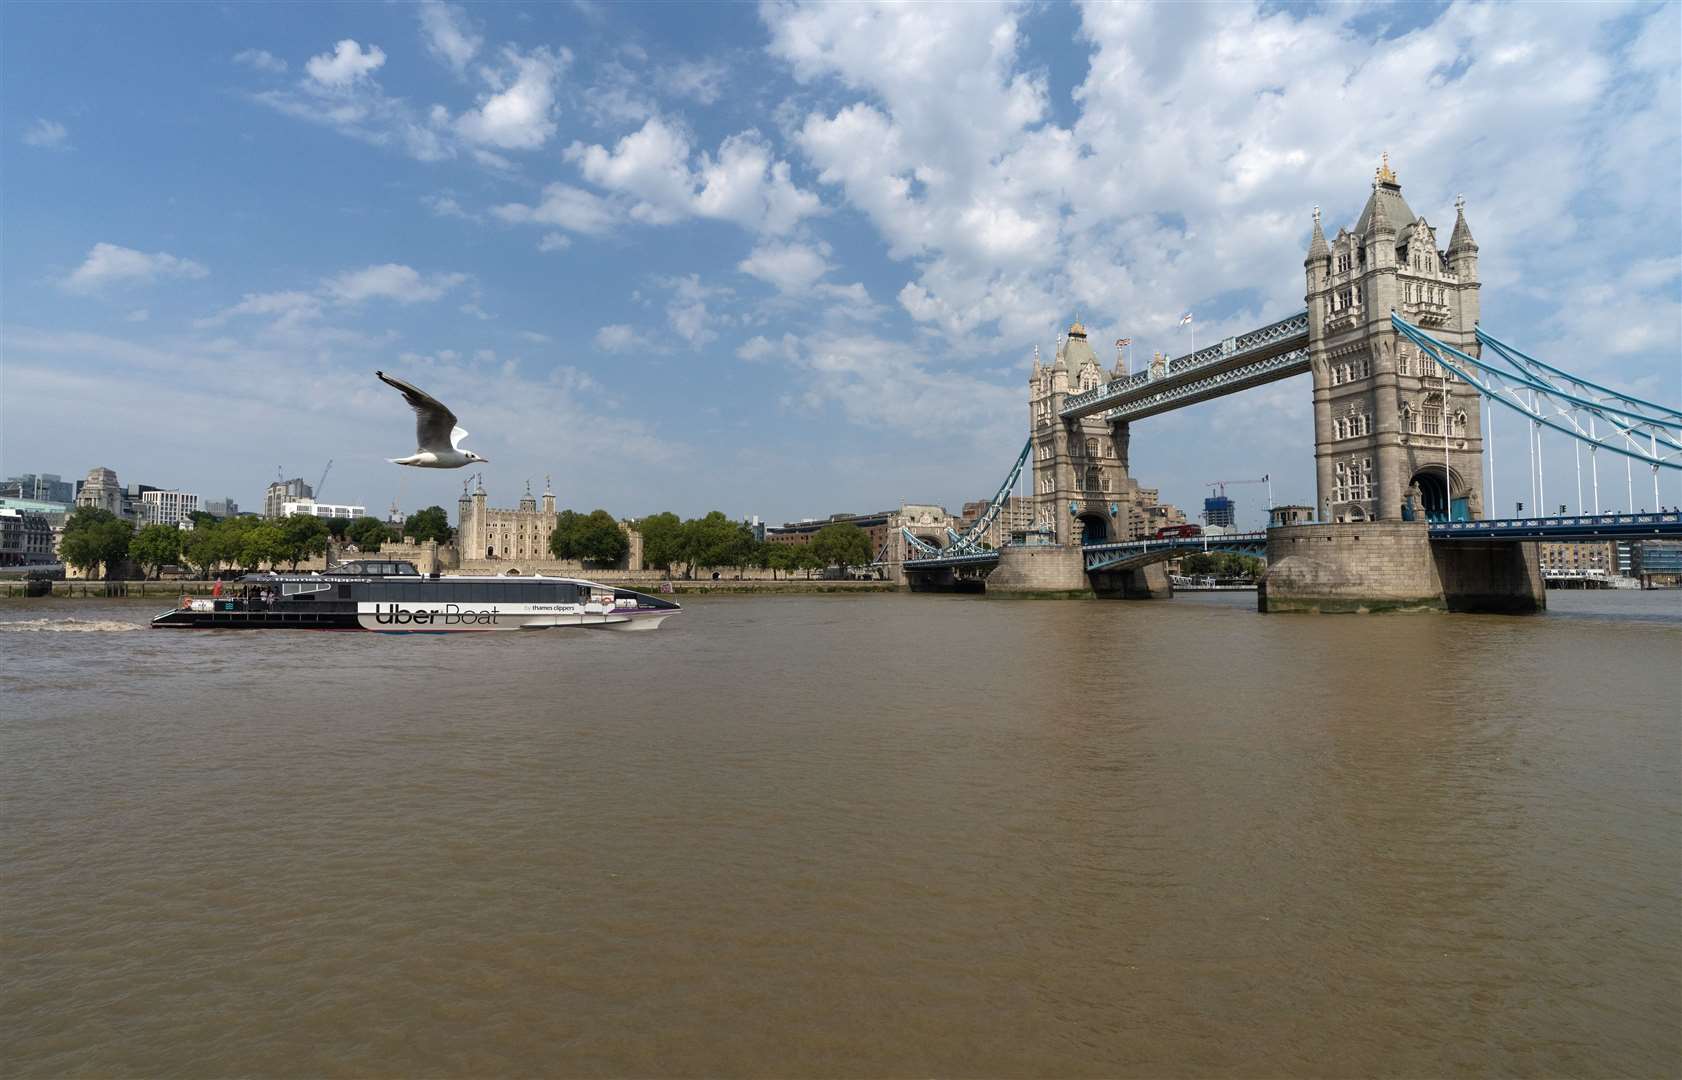 Uber Boat will run a half-term special service from Gravesend to Greenwich and London